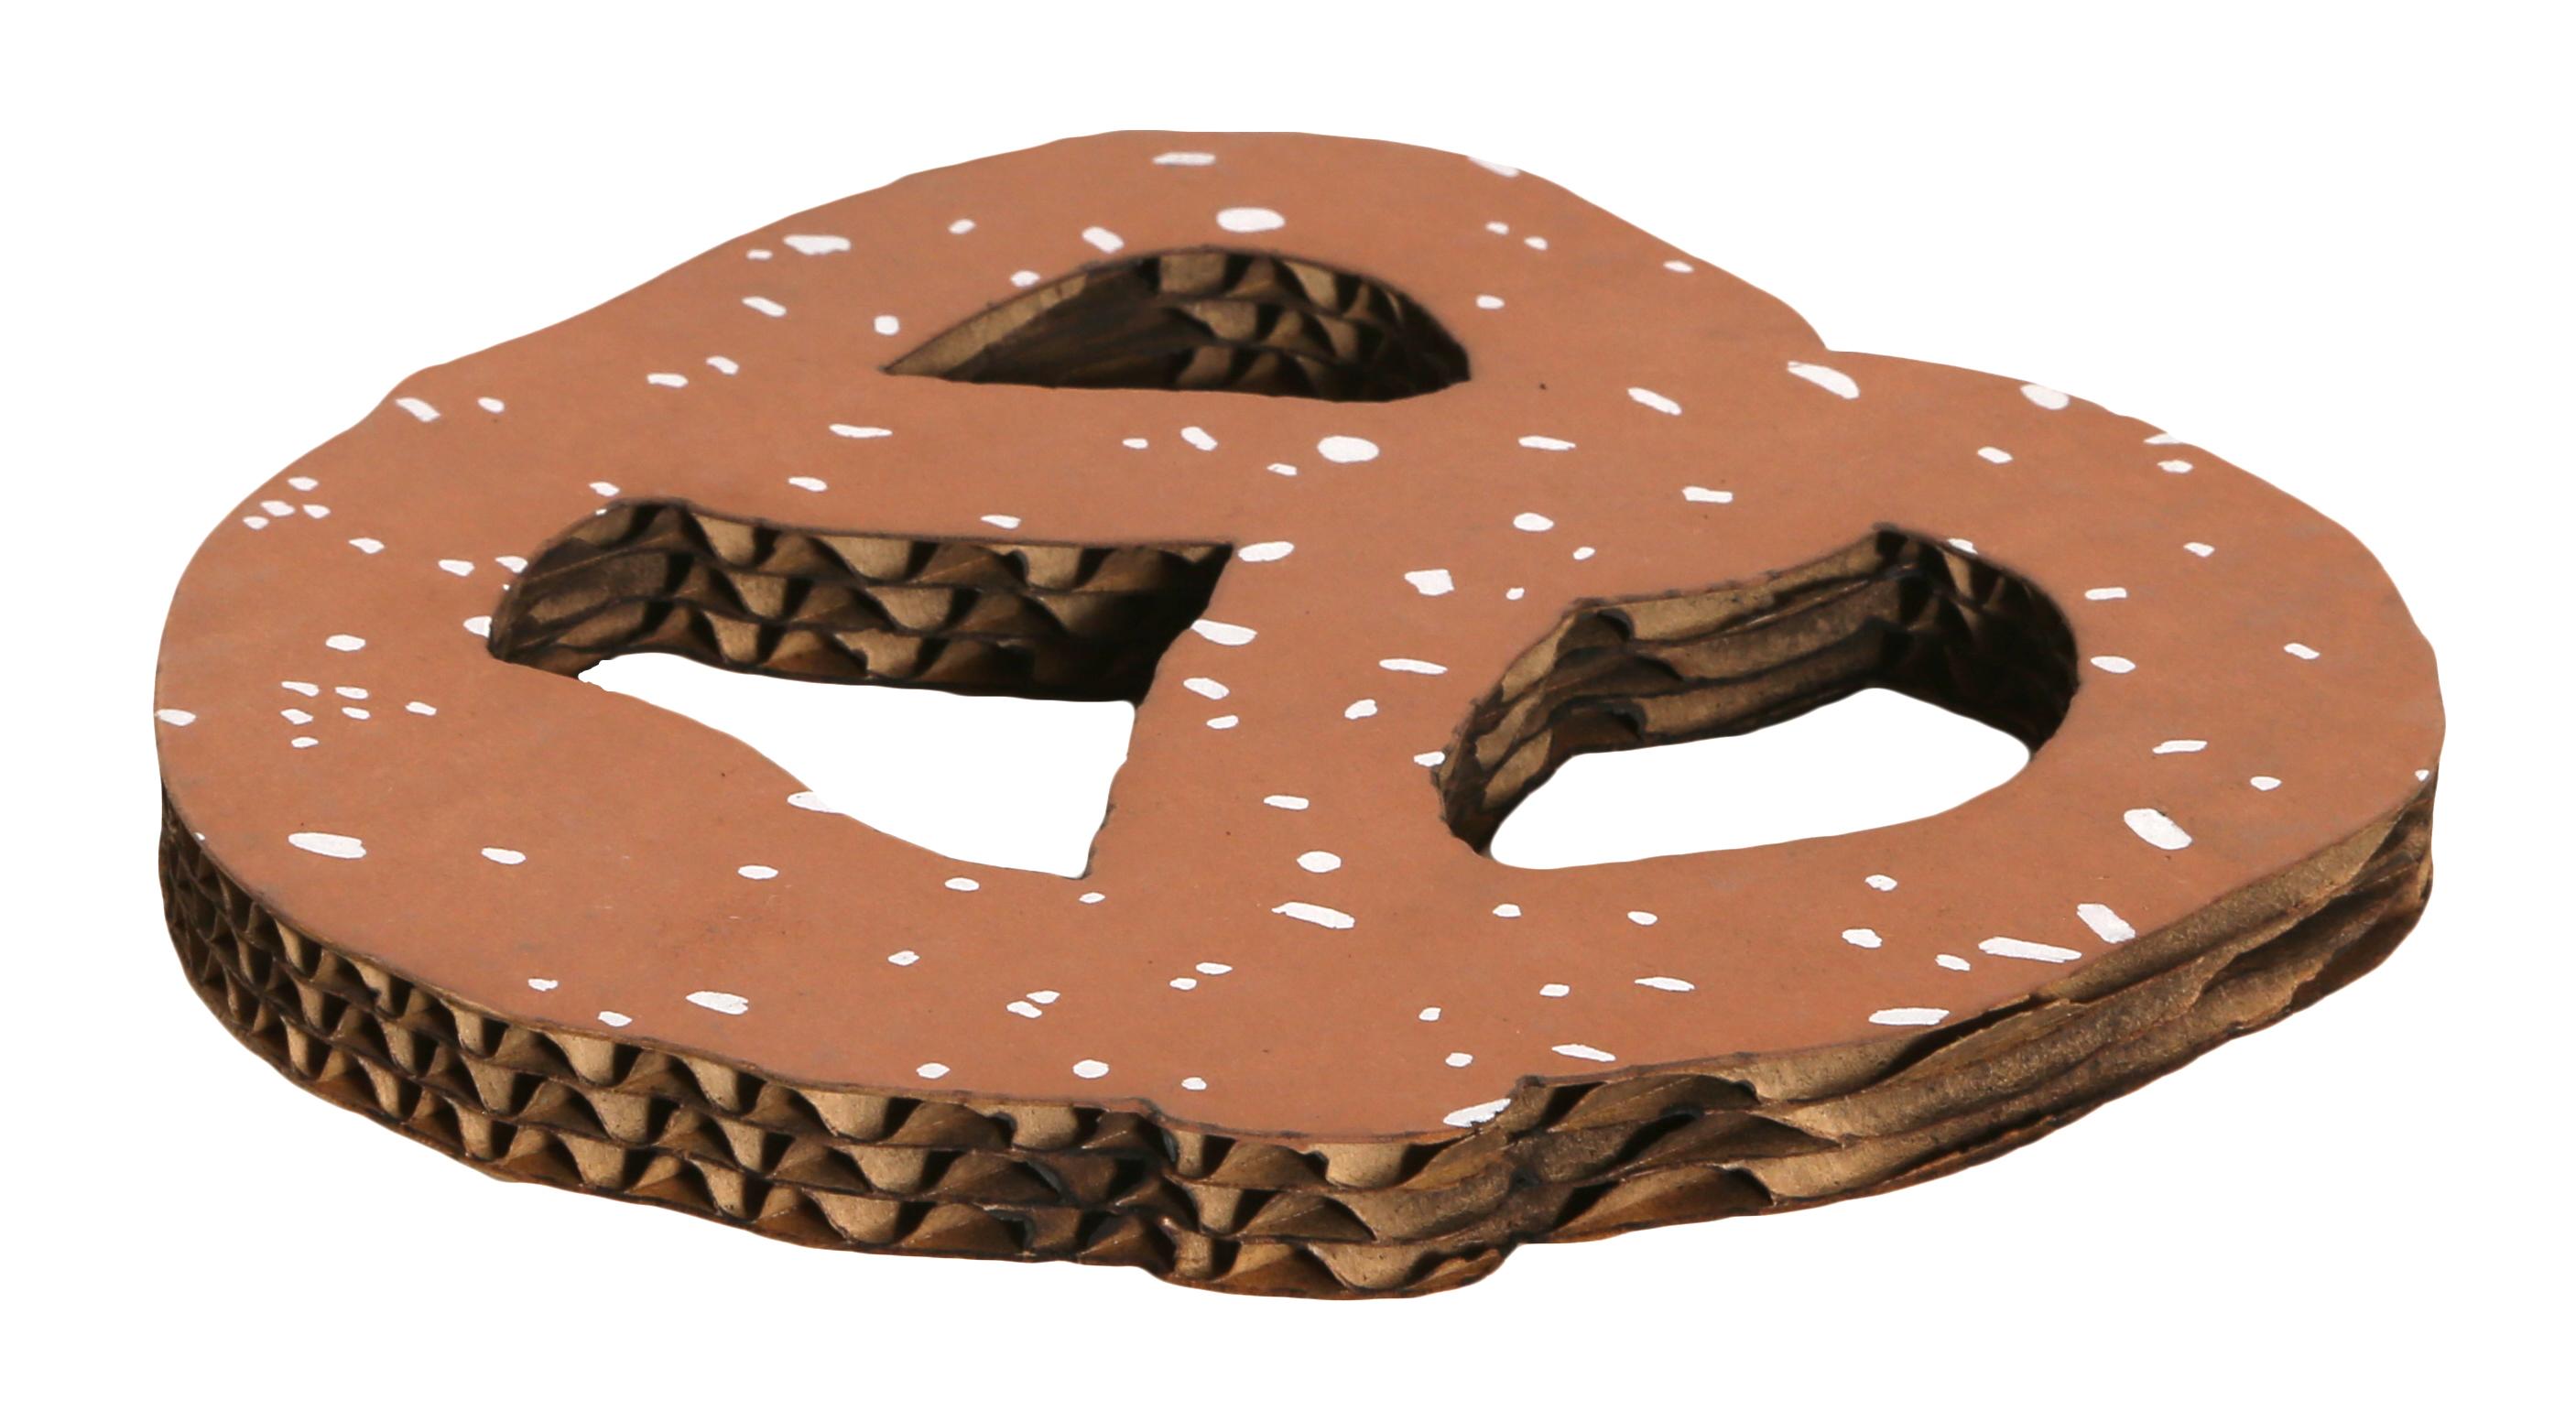 Artist: Claes Oldenburg, Swedish/American (1929 - )
Title: N.Y.C Pretzel
Year: 1994
Medium: Three-ply cardboard multiple with screenprint, stamped with the signature and artist's copyright stamp on the reverse
Edition: Unlimited
Size: 6.8 x 6.5 x